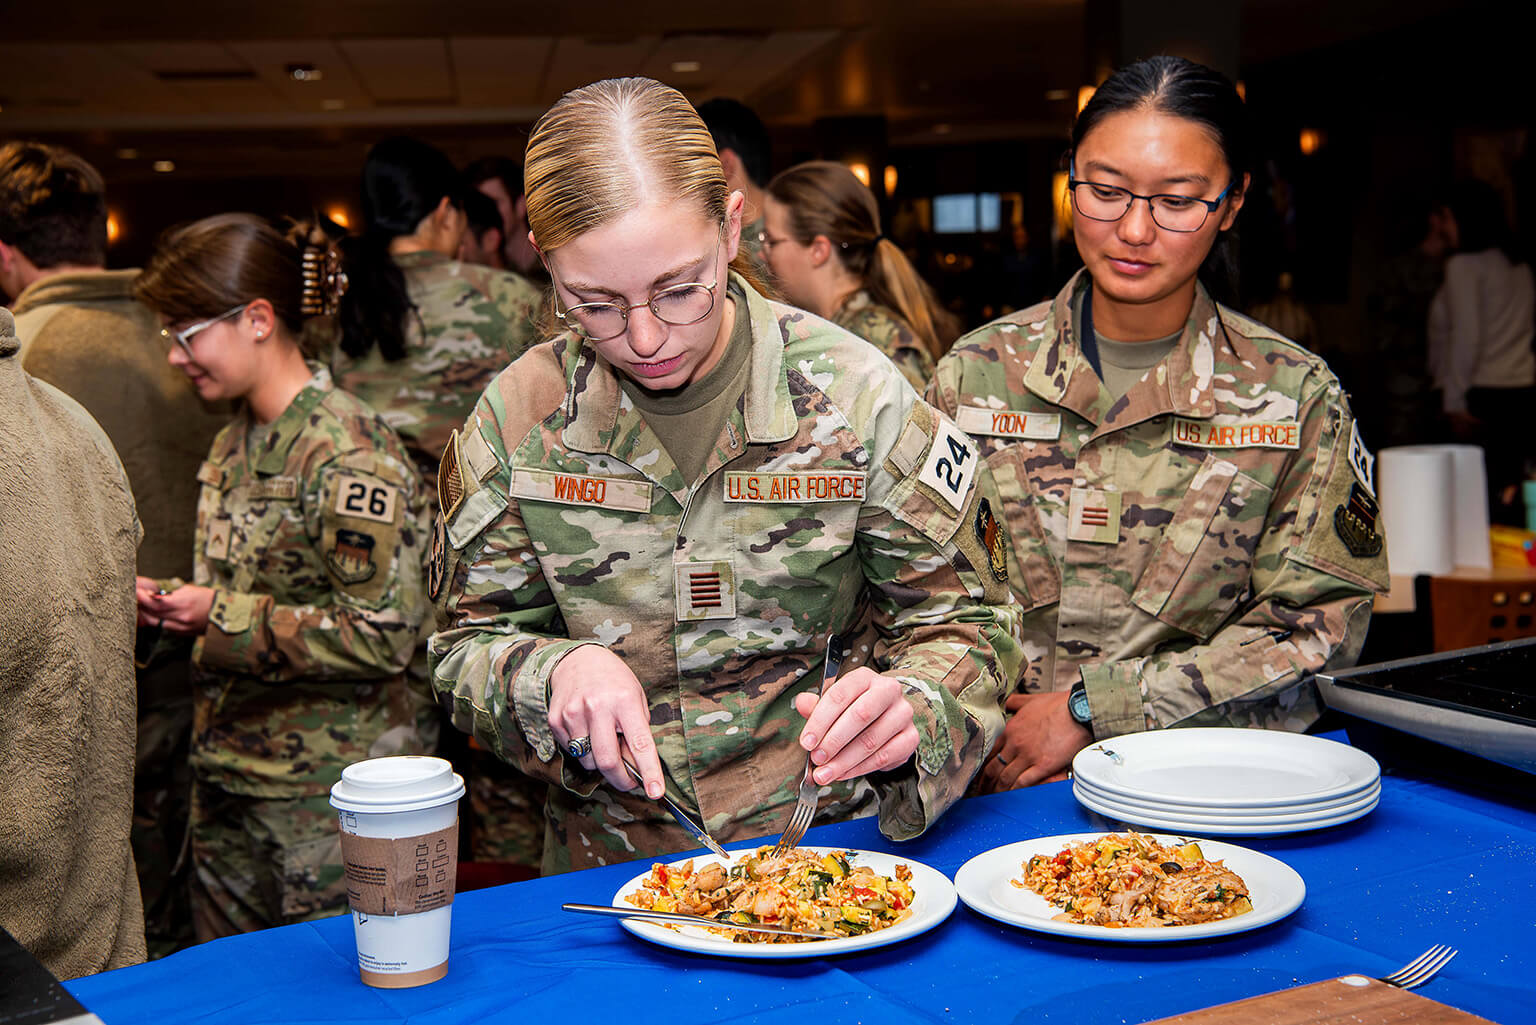 Cadet 1st Class Hannah Wingo and Cadet 1st Class Kelly Yoon try celebrity chef Robert Irvine's dish during a cooking demonstration.